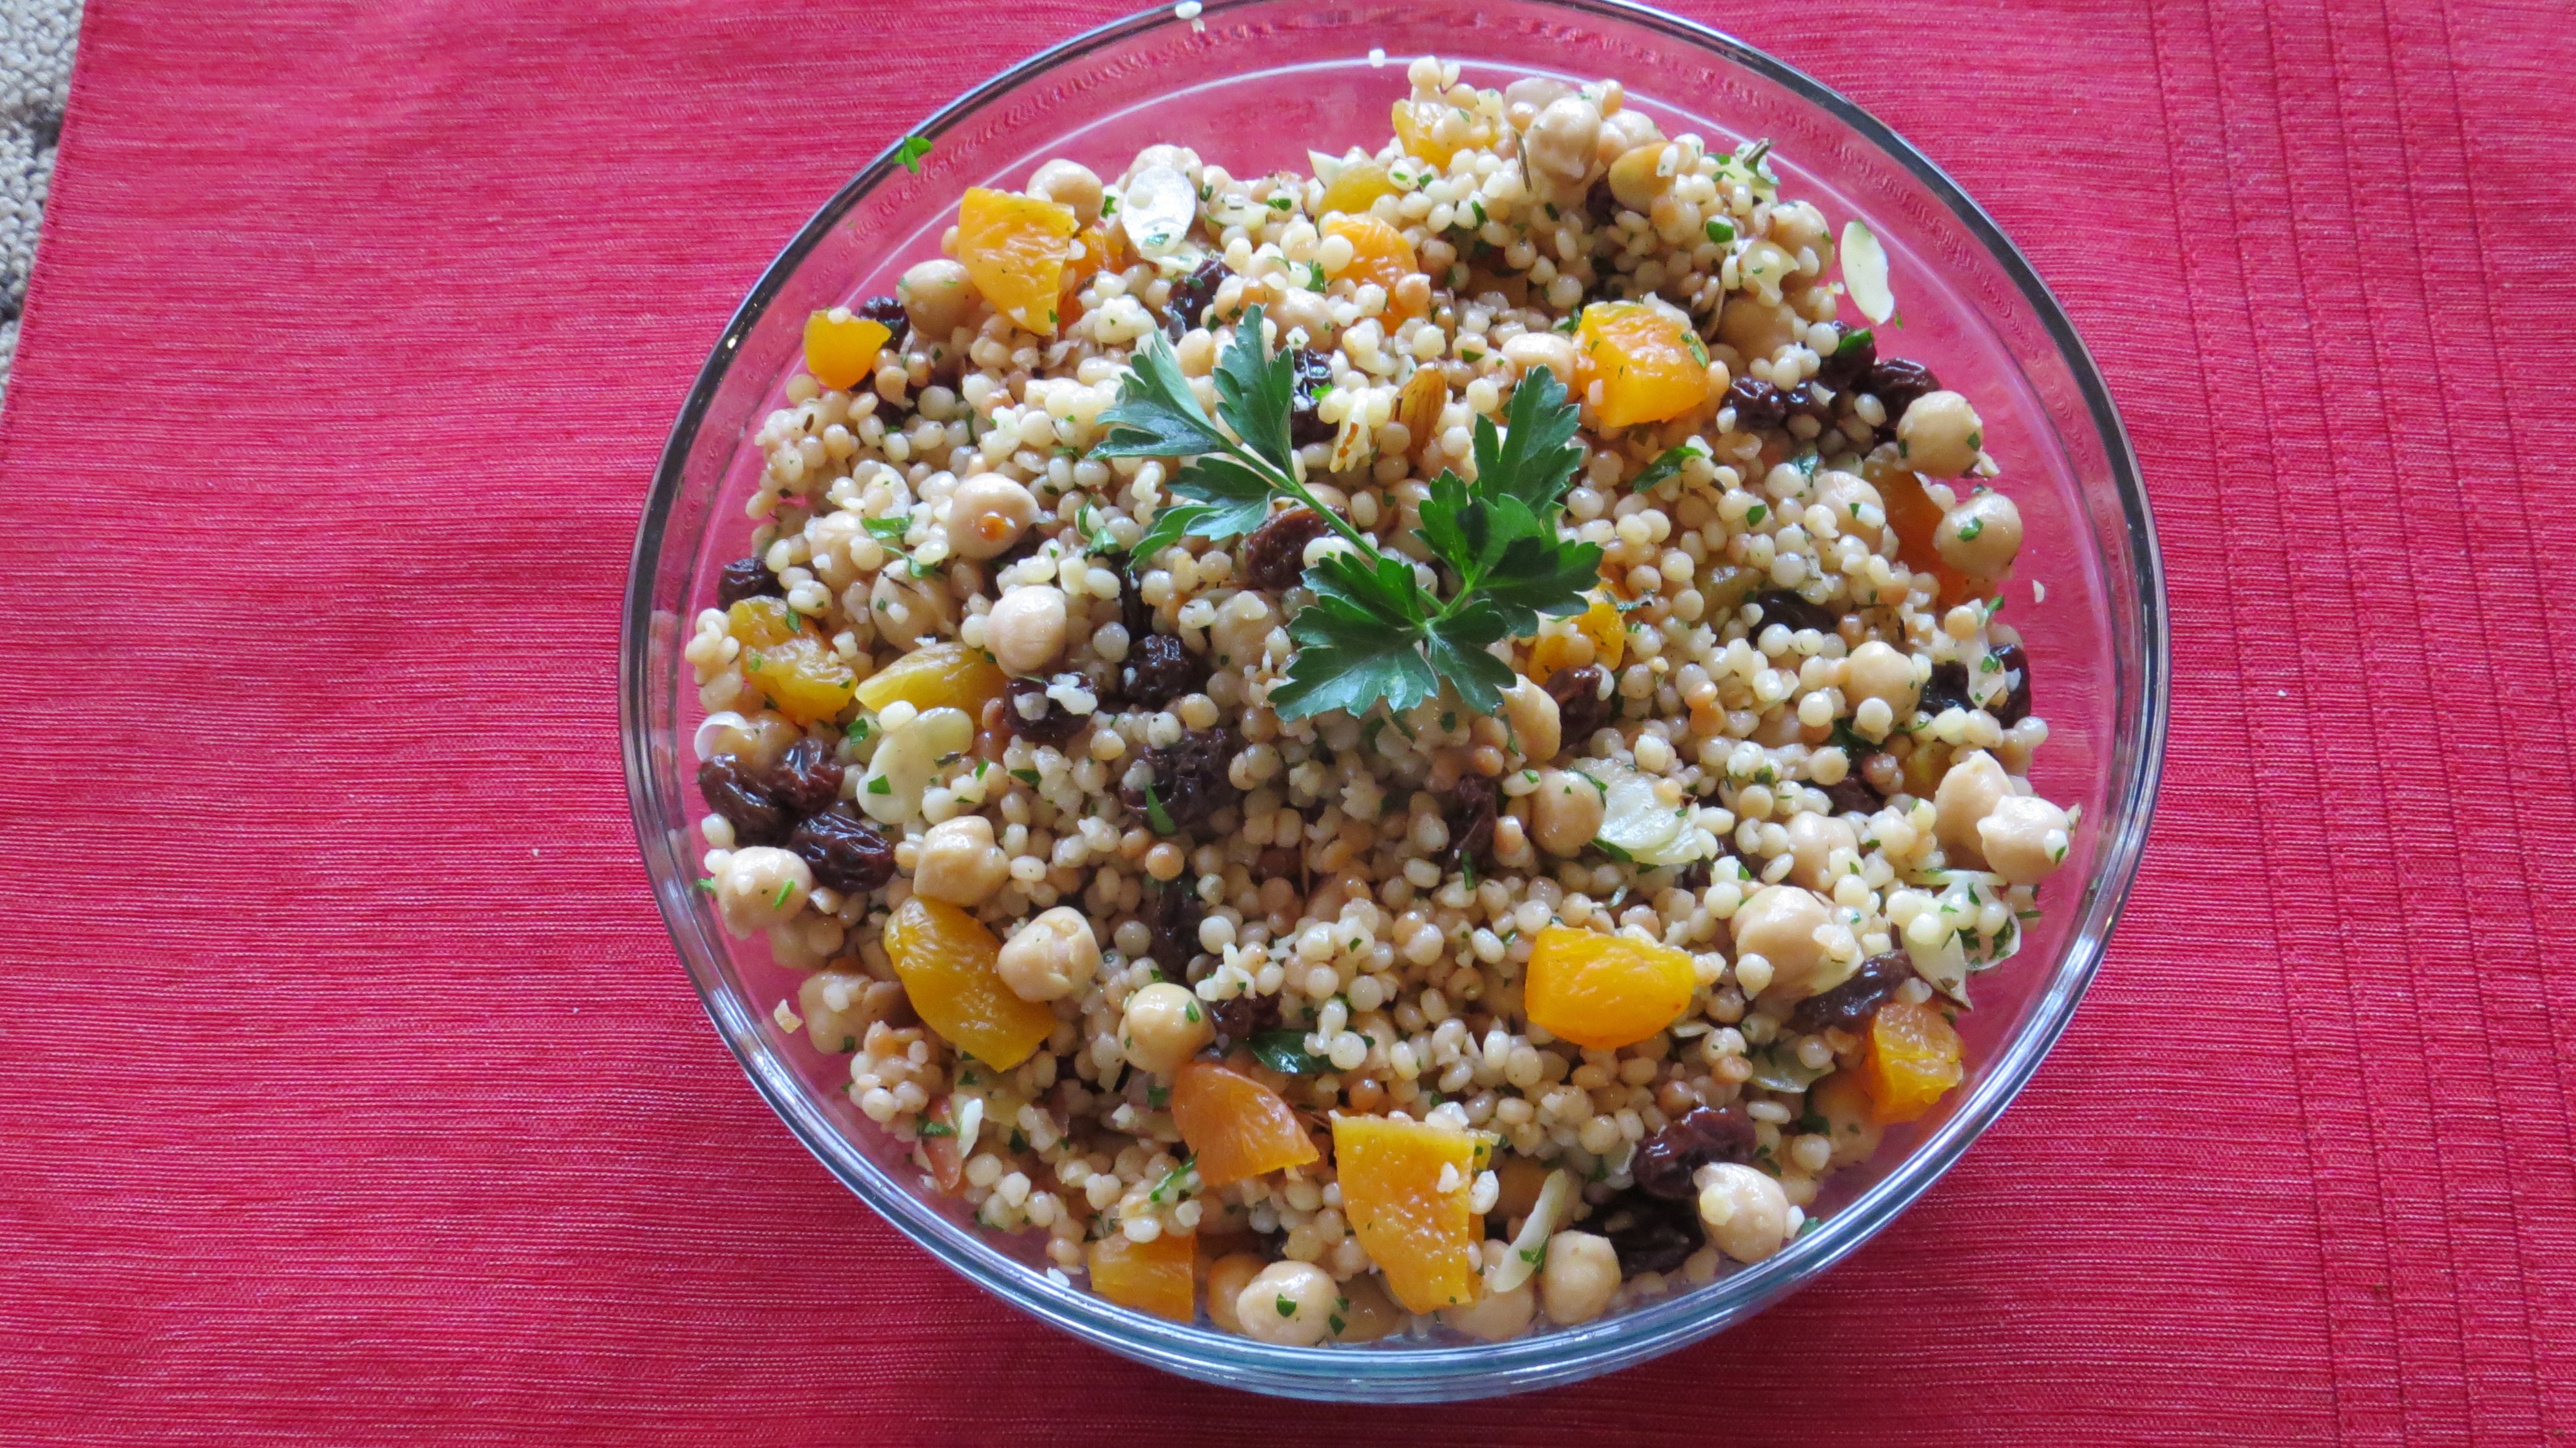 Moroccan-spiced Couscous